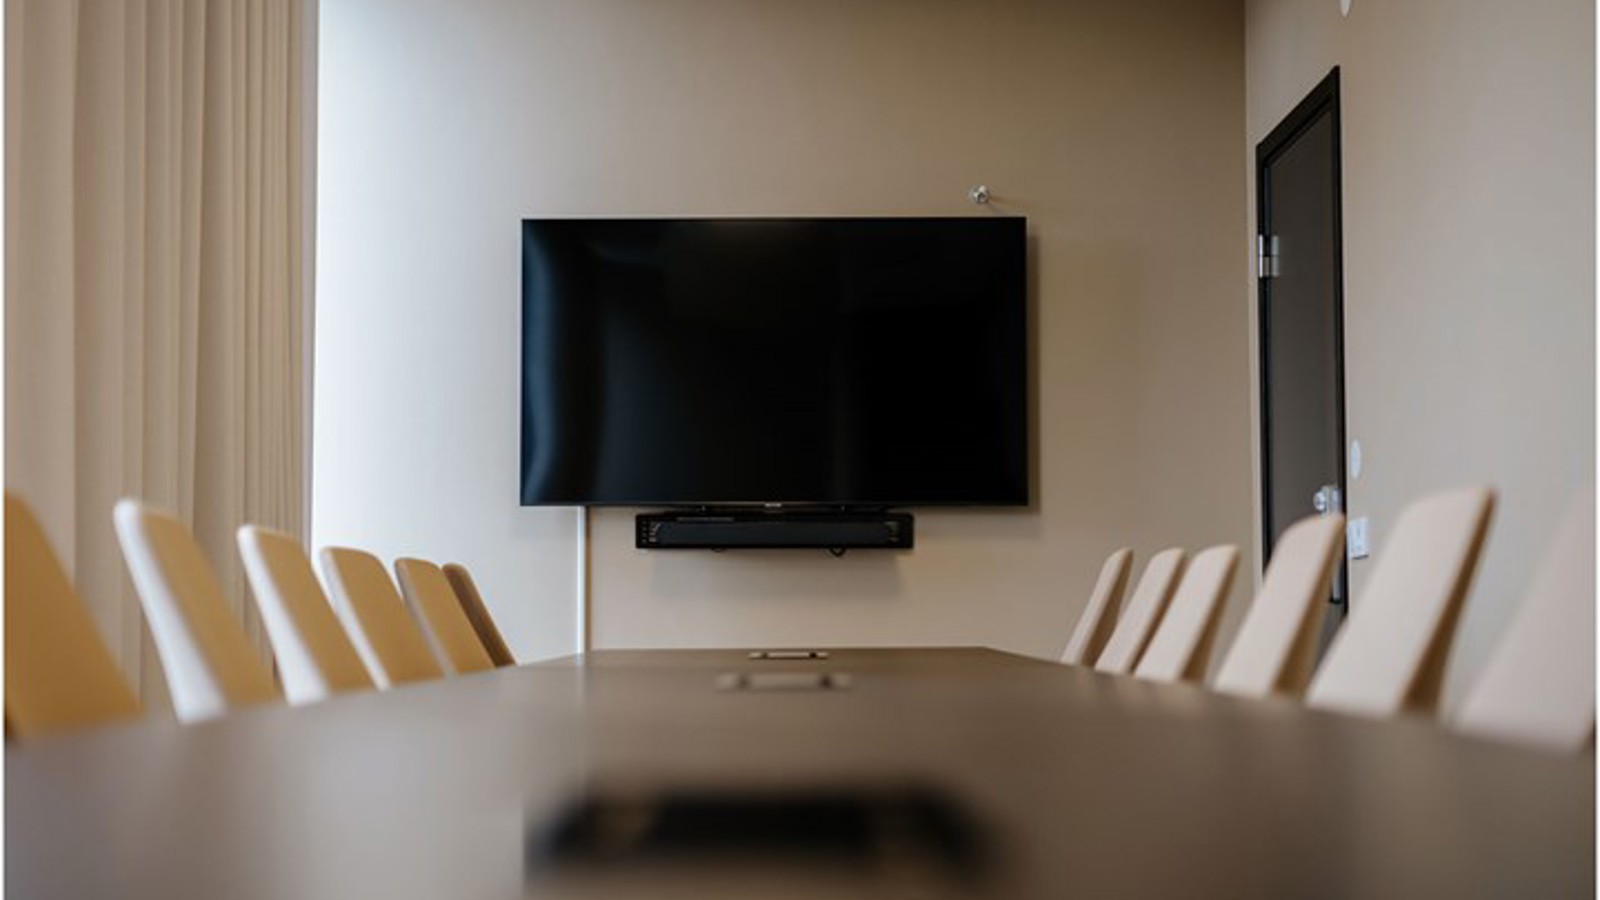 Conference room with board seating, brown table and TV screen